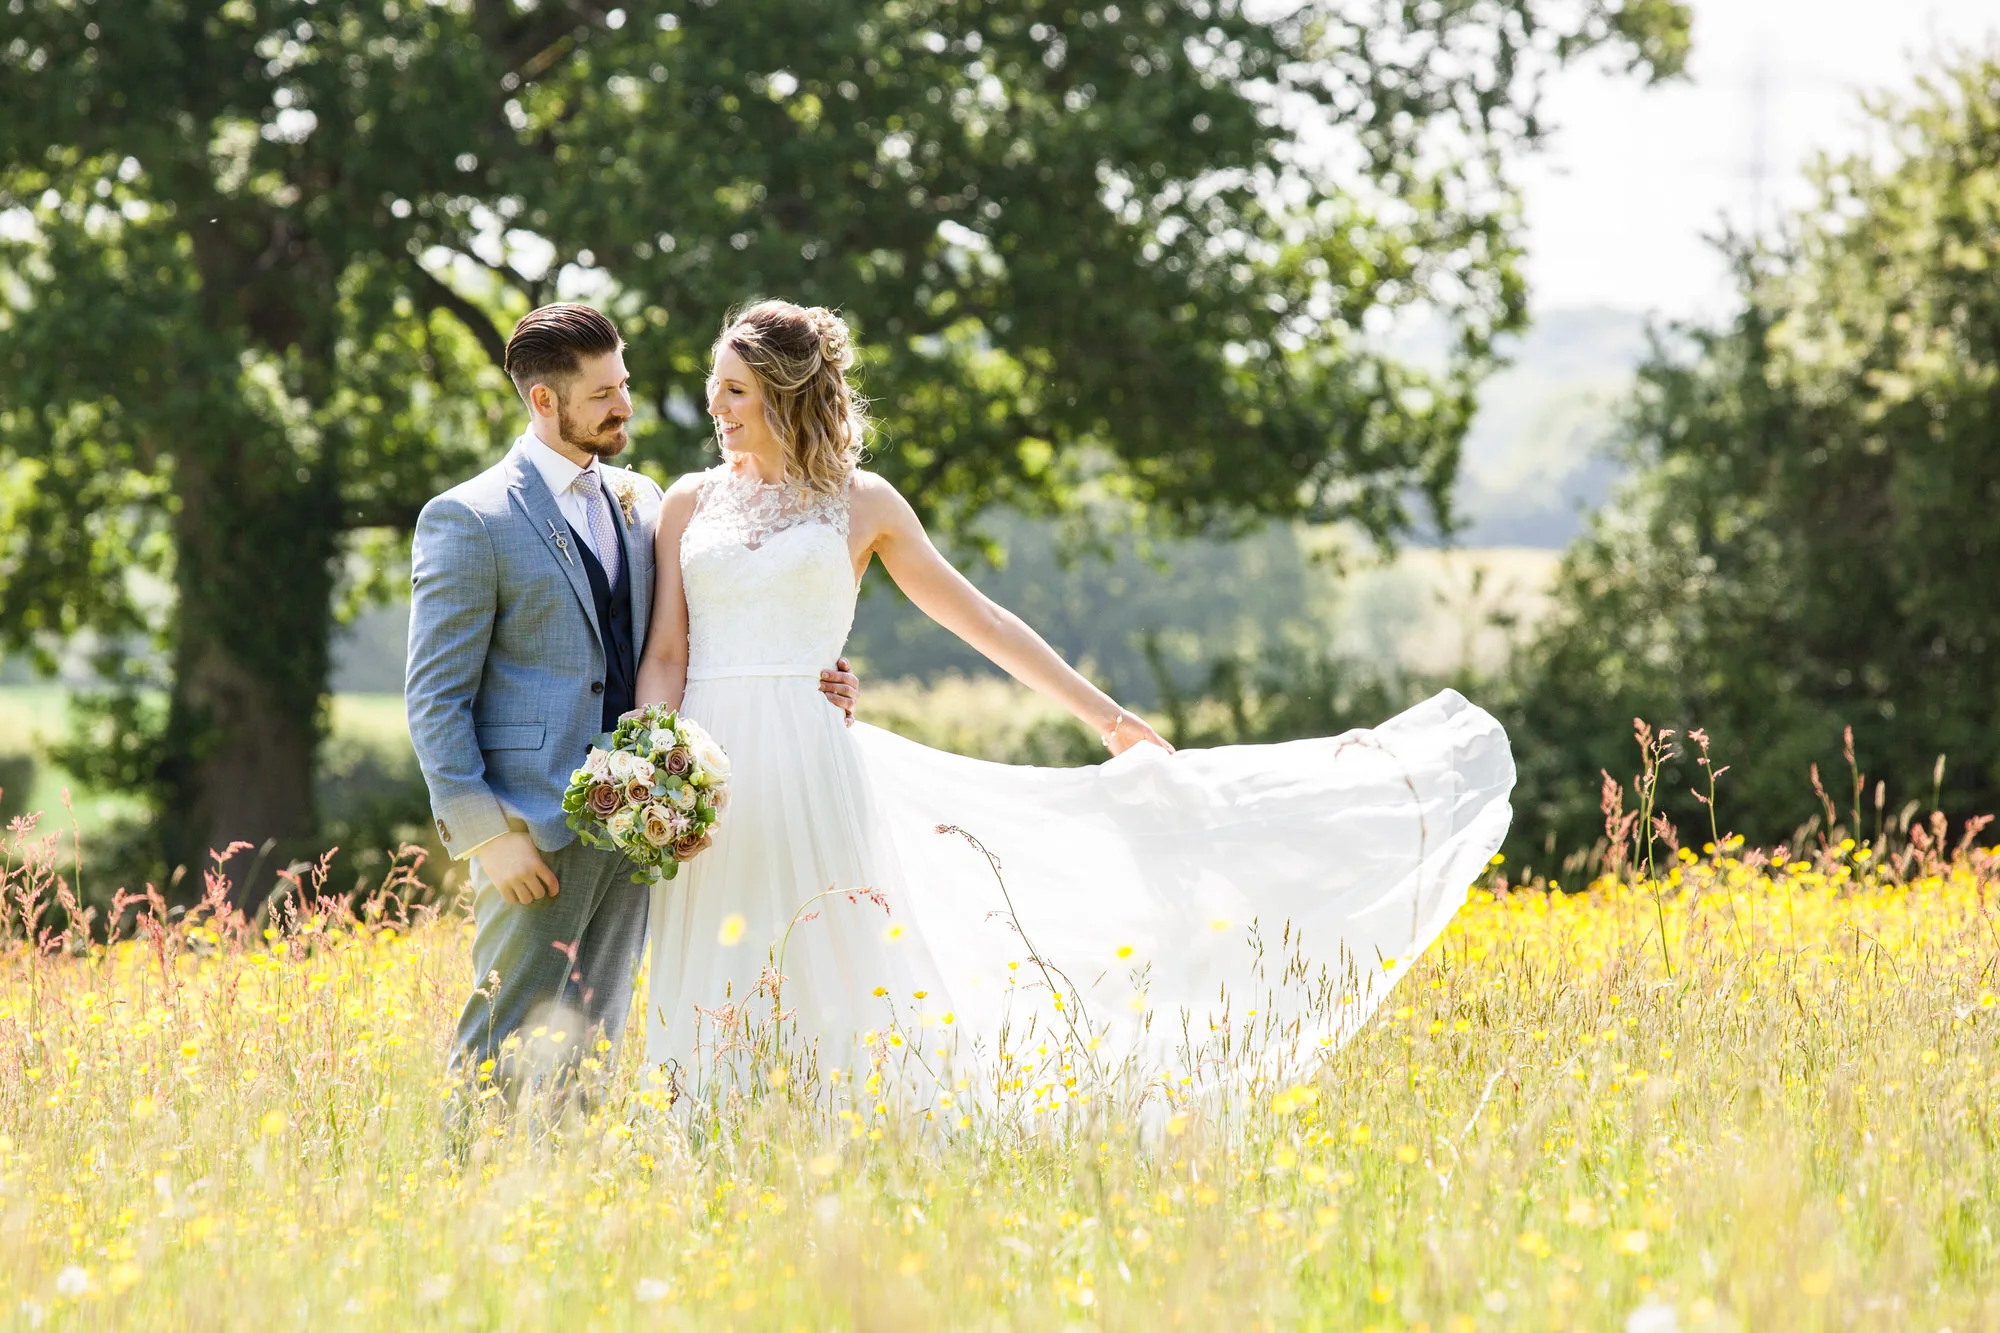 Reportage Wedding Photographer - a bride and groom stand together in a Summer meadow of yellow wildflowers 